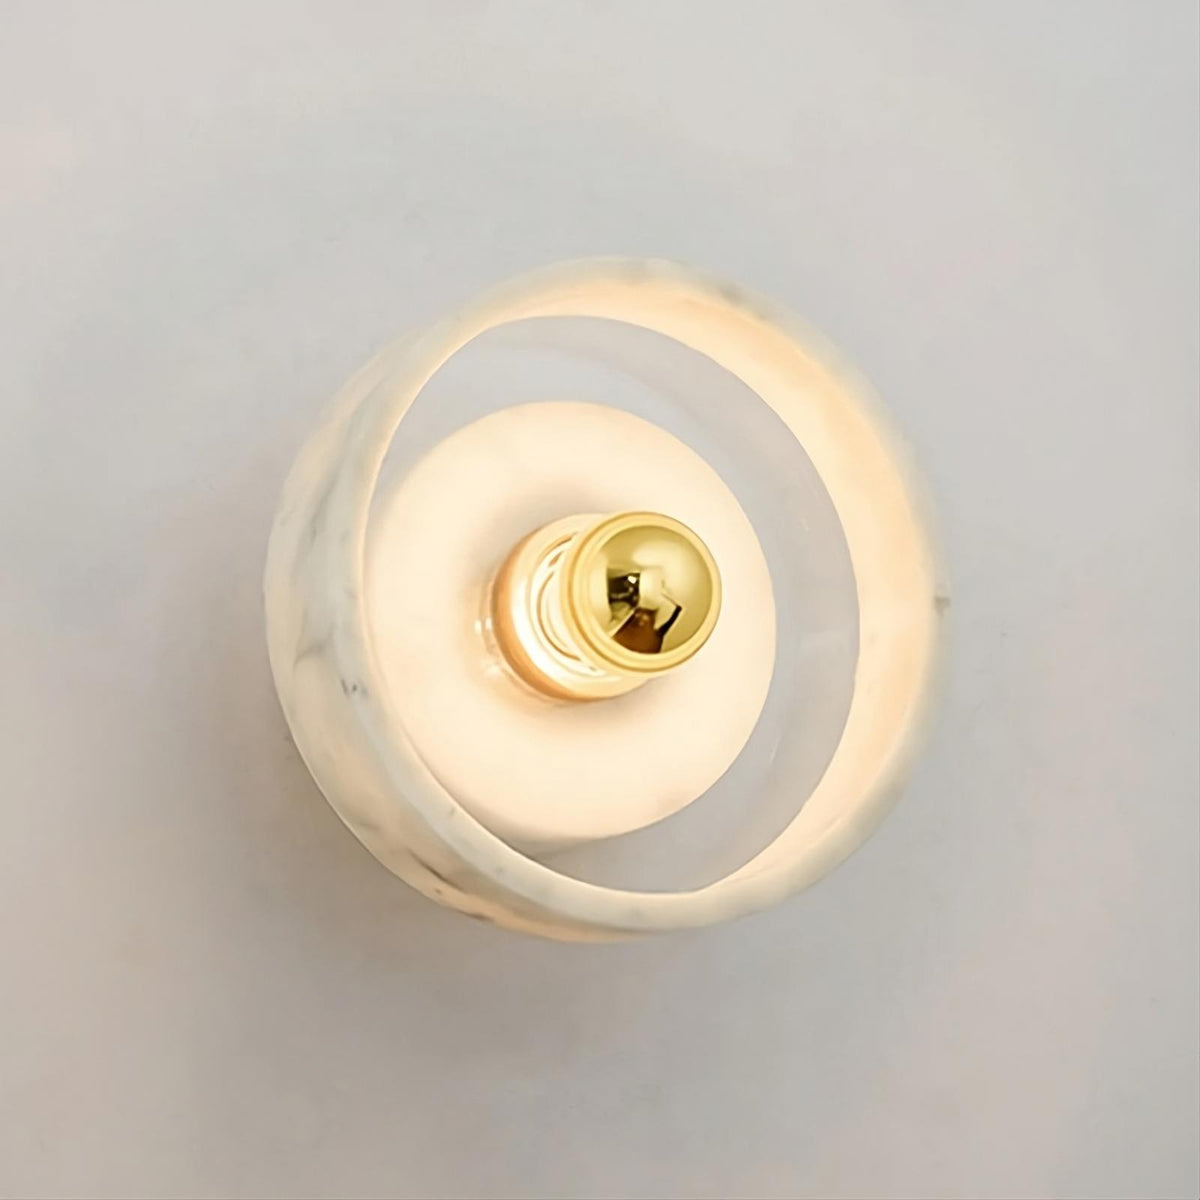 A modern wall light fixture with a minimalist design features a central light bulb surrounded by a circular, translucent white ring. The soft light emitted creates a warm ambiance on a plain, light-colored background, enhanced by the unique texture of the Moonshade Natural Marble Wall Light Fixture from Morsale.com.